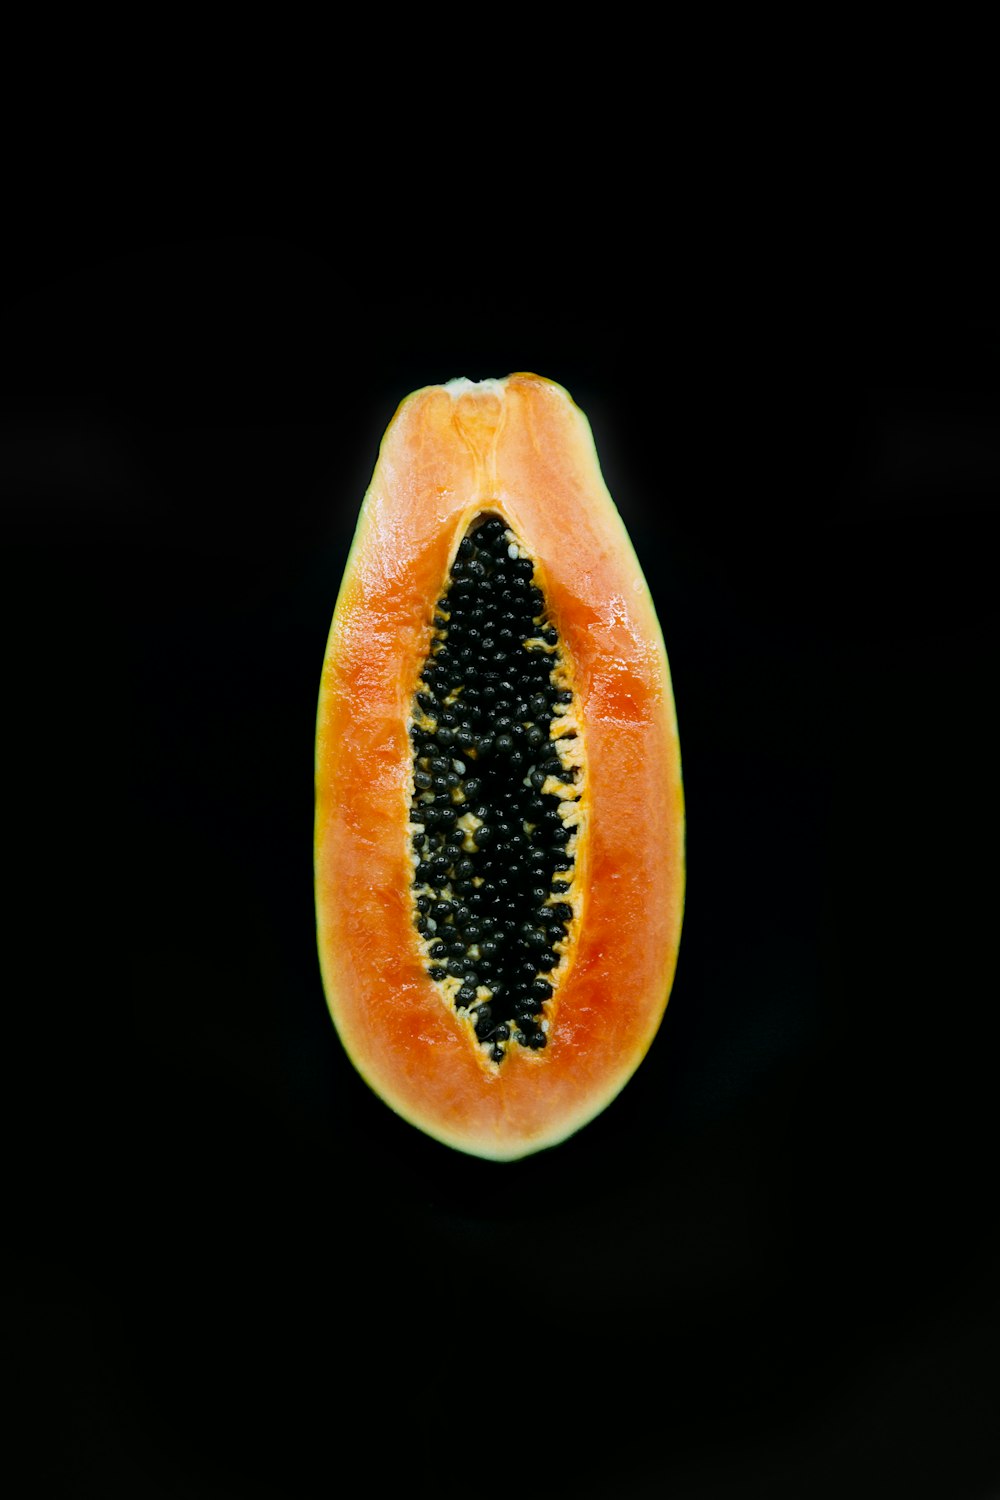 sliced tomato with black background